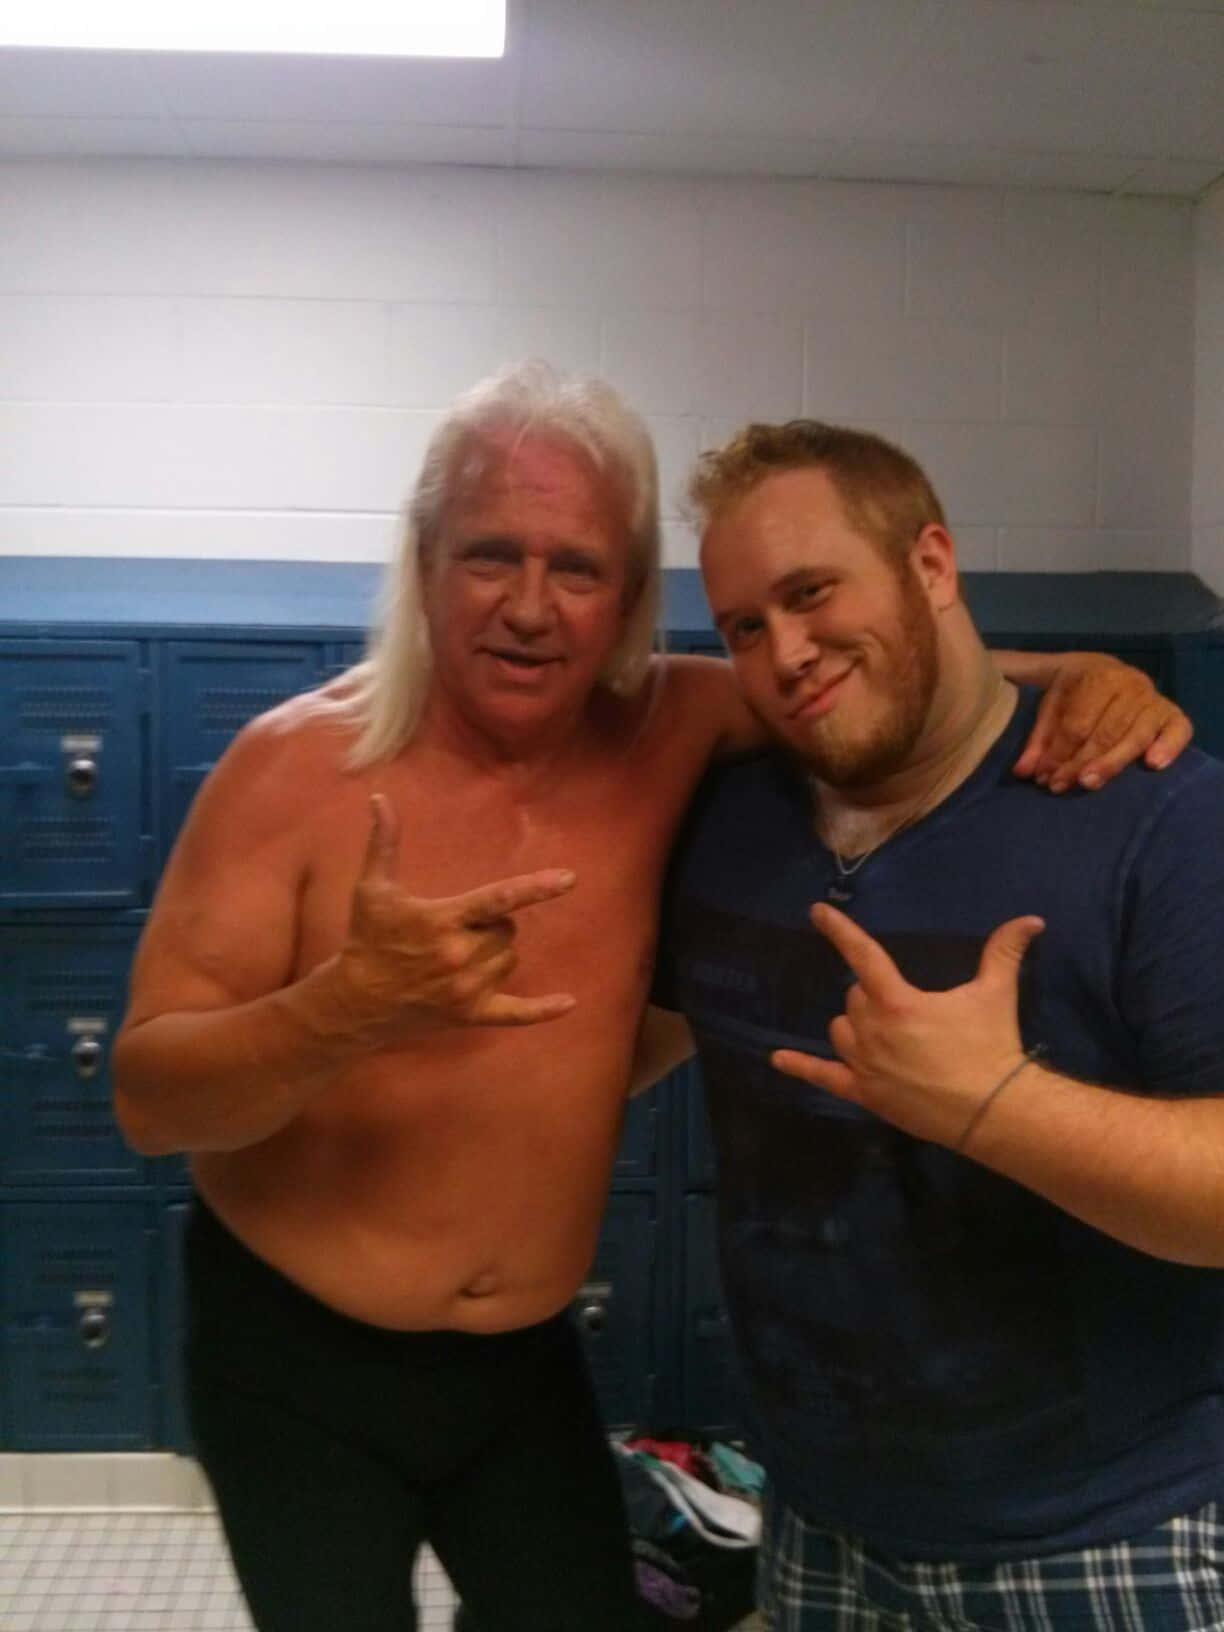 Ricky Morton Photograph With A Fan Wallpaper